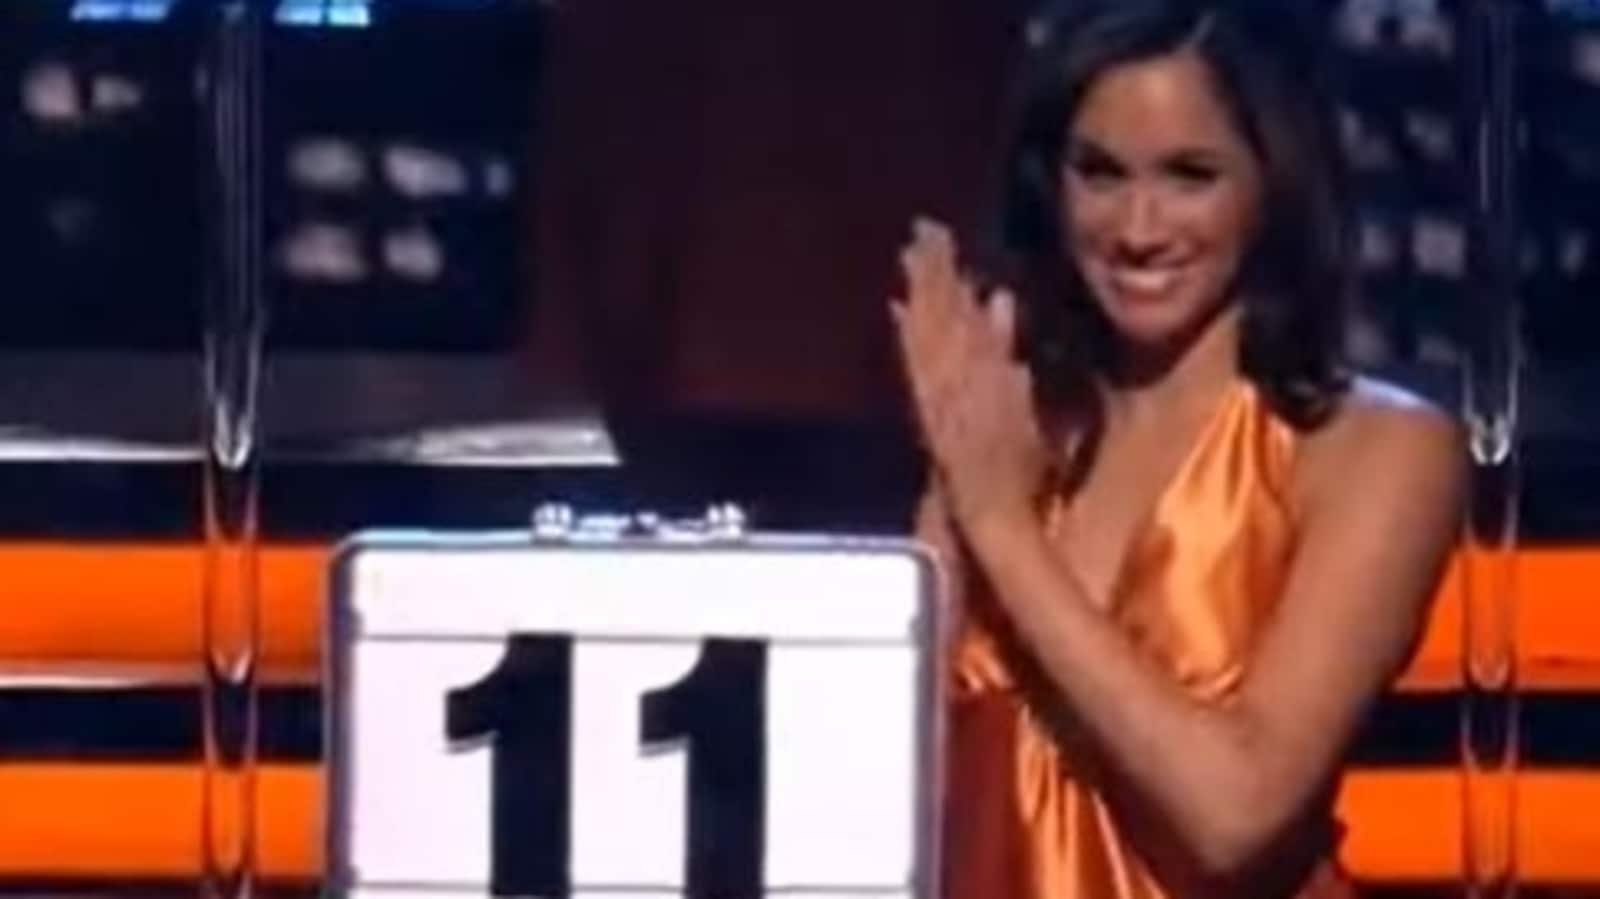 Meghan Markle reveals she felt like Deal or No Deal reduced her to a bimbo